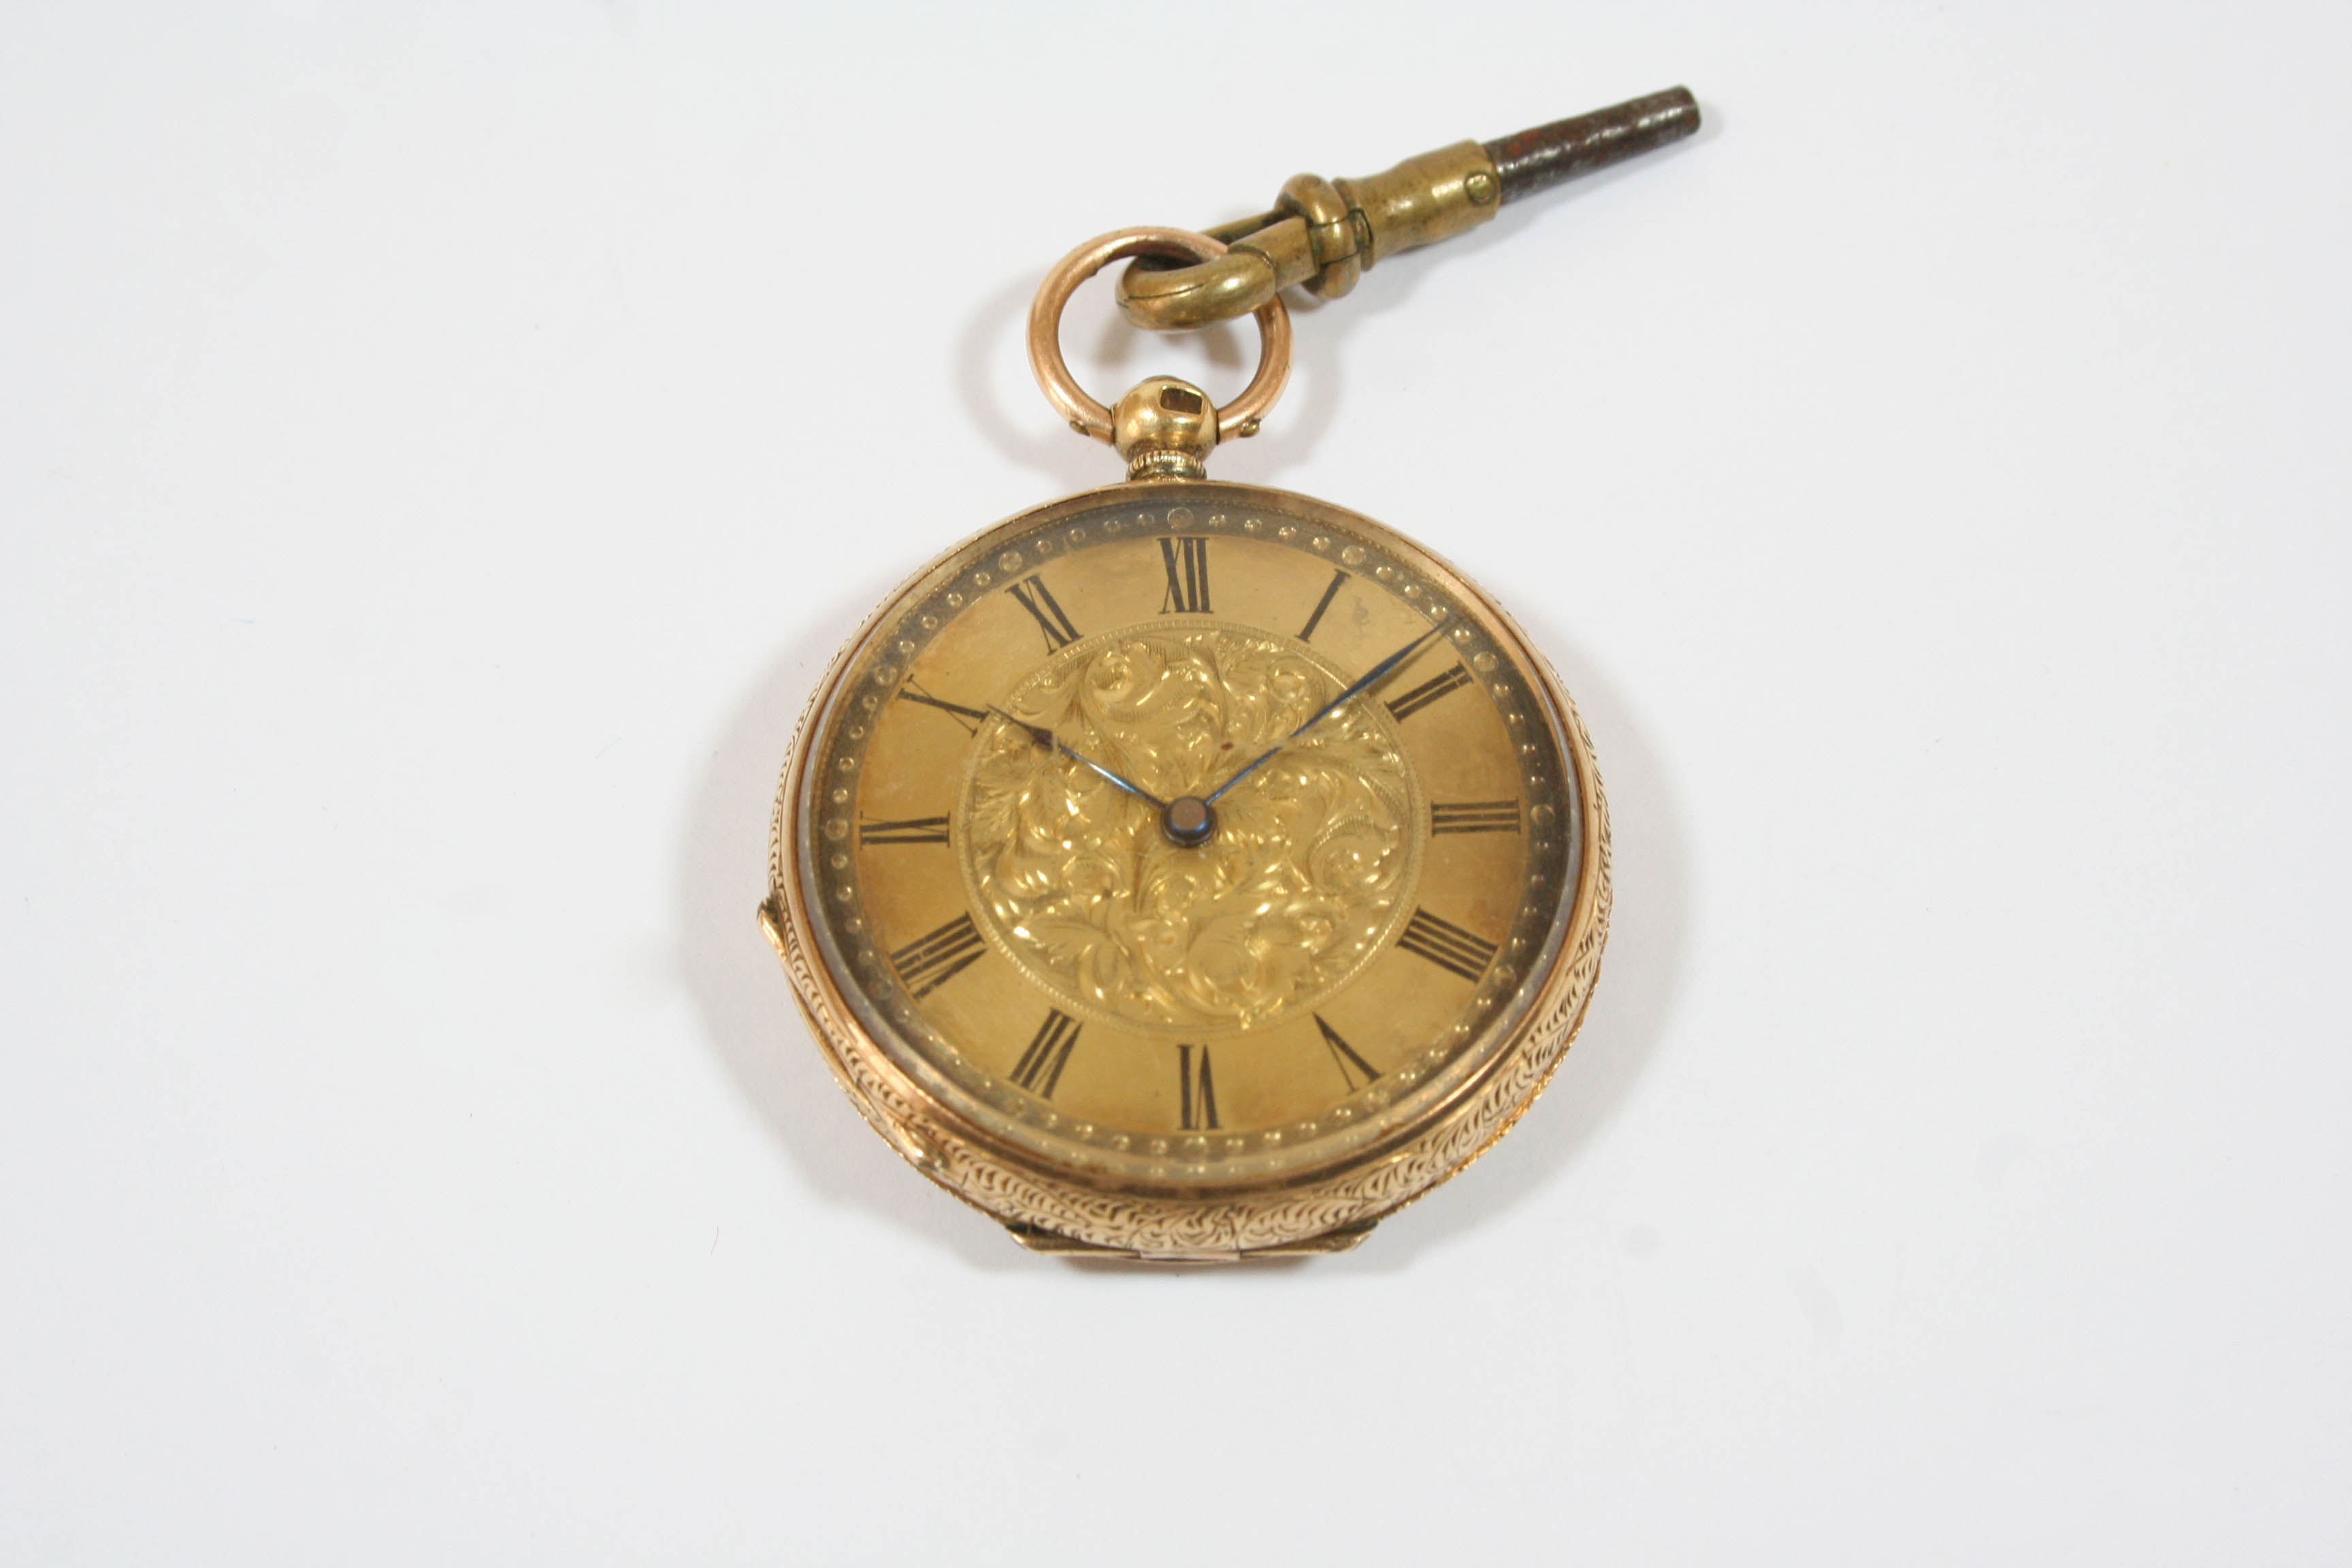 AN 18CT. GOLD OPEN FACED POCKET WATCH the gold foliate dial with Roman numerals, with foliate